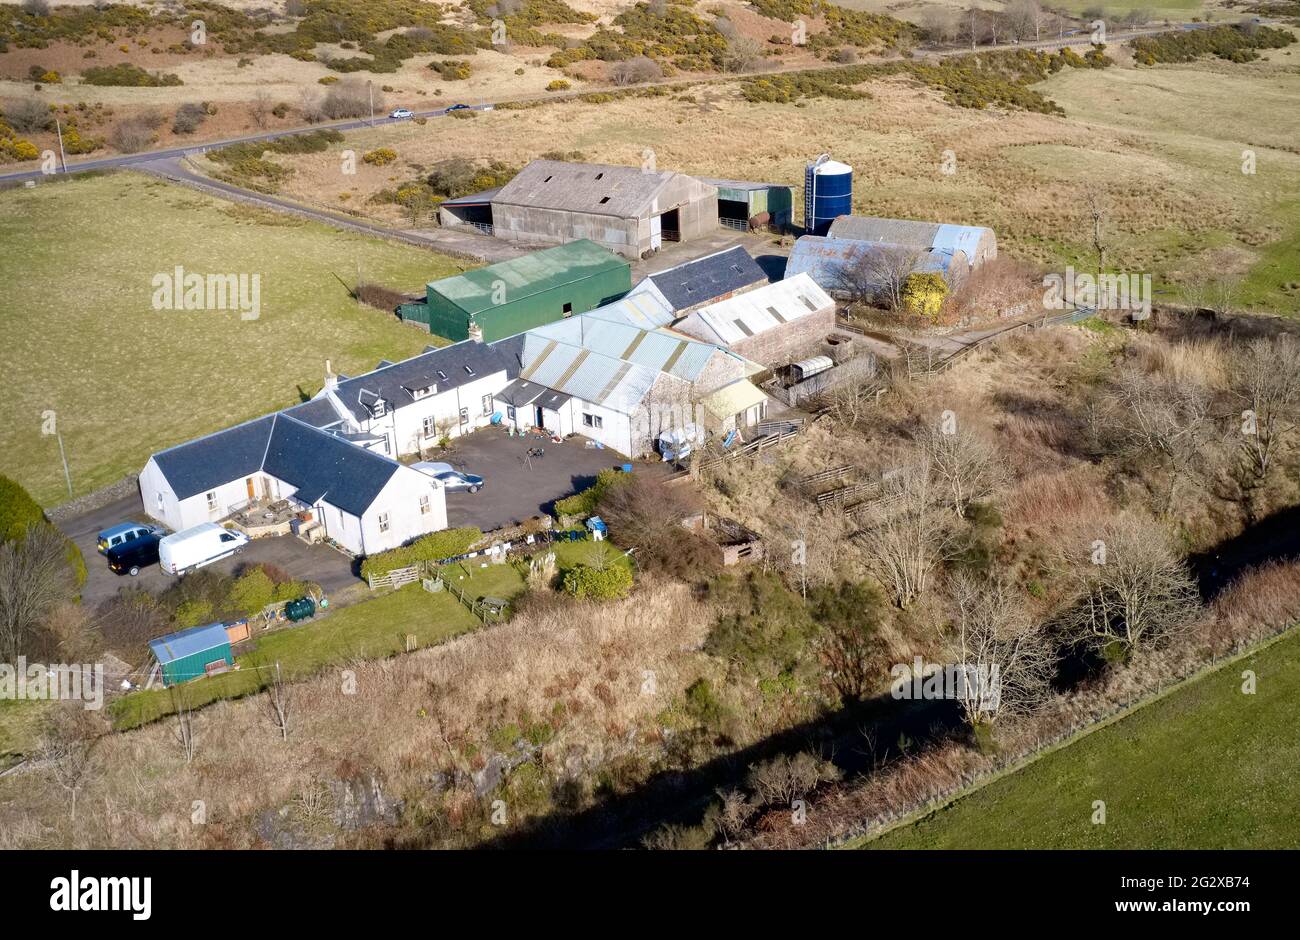 Farm and farmyard buildings in rural countryside aerial view from above Stock Photo